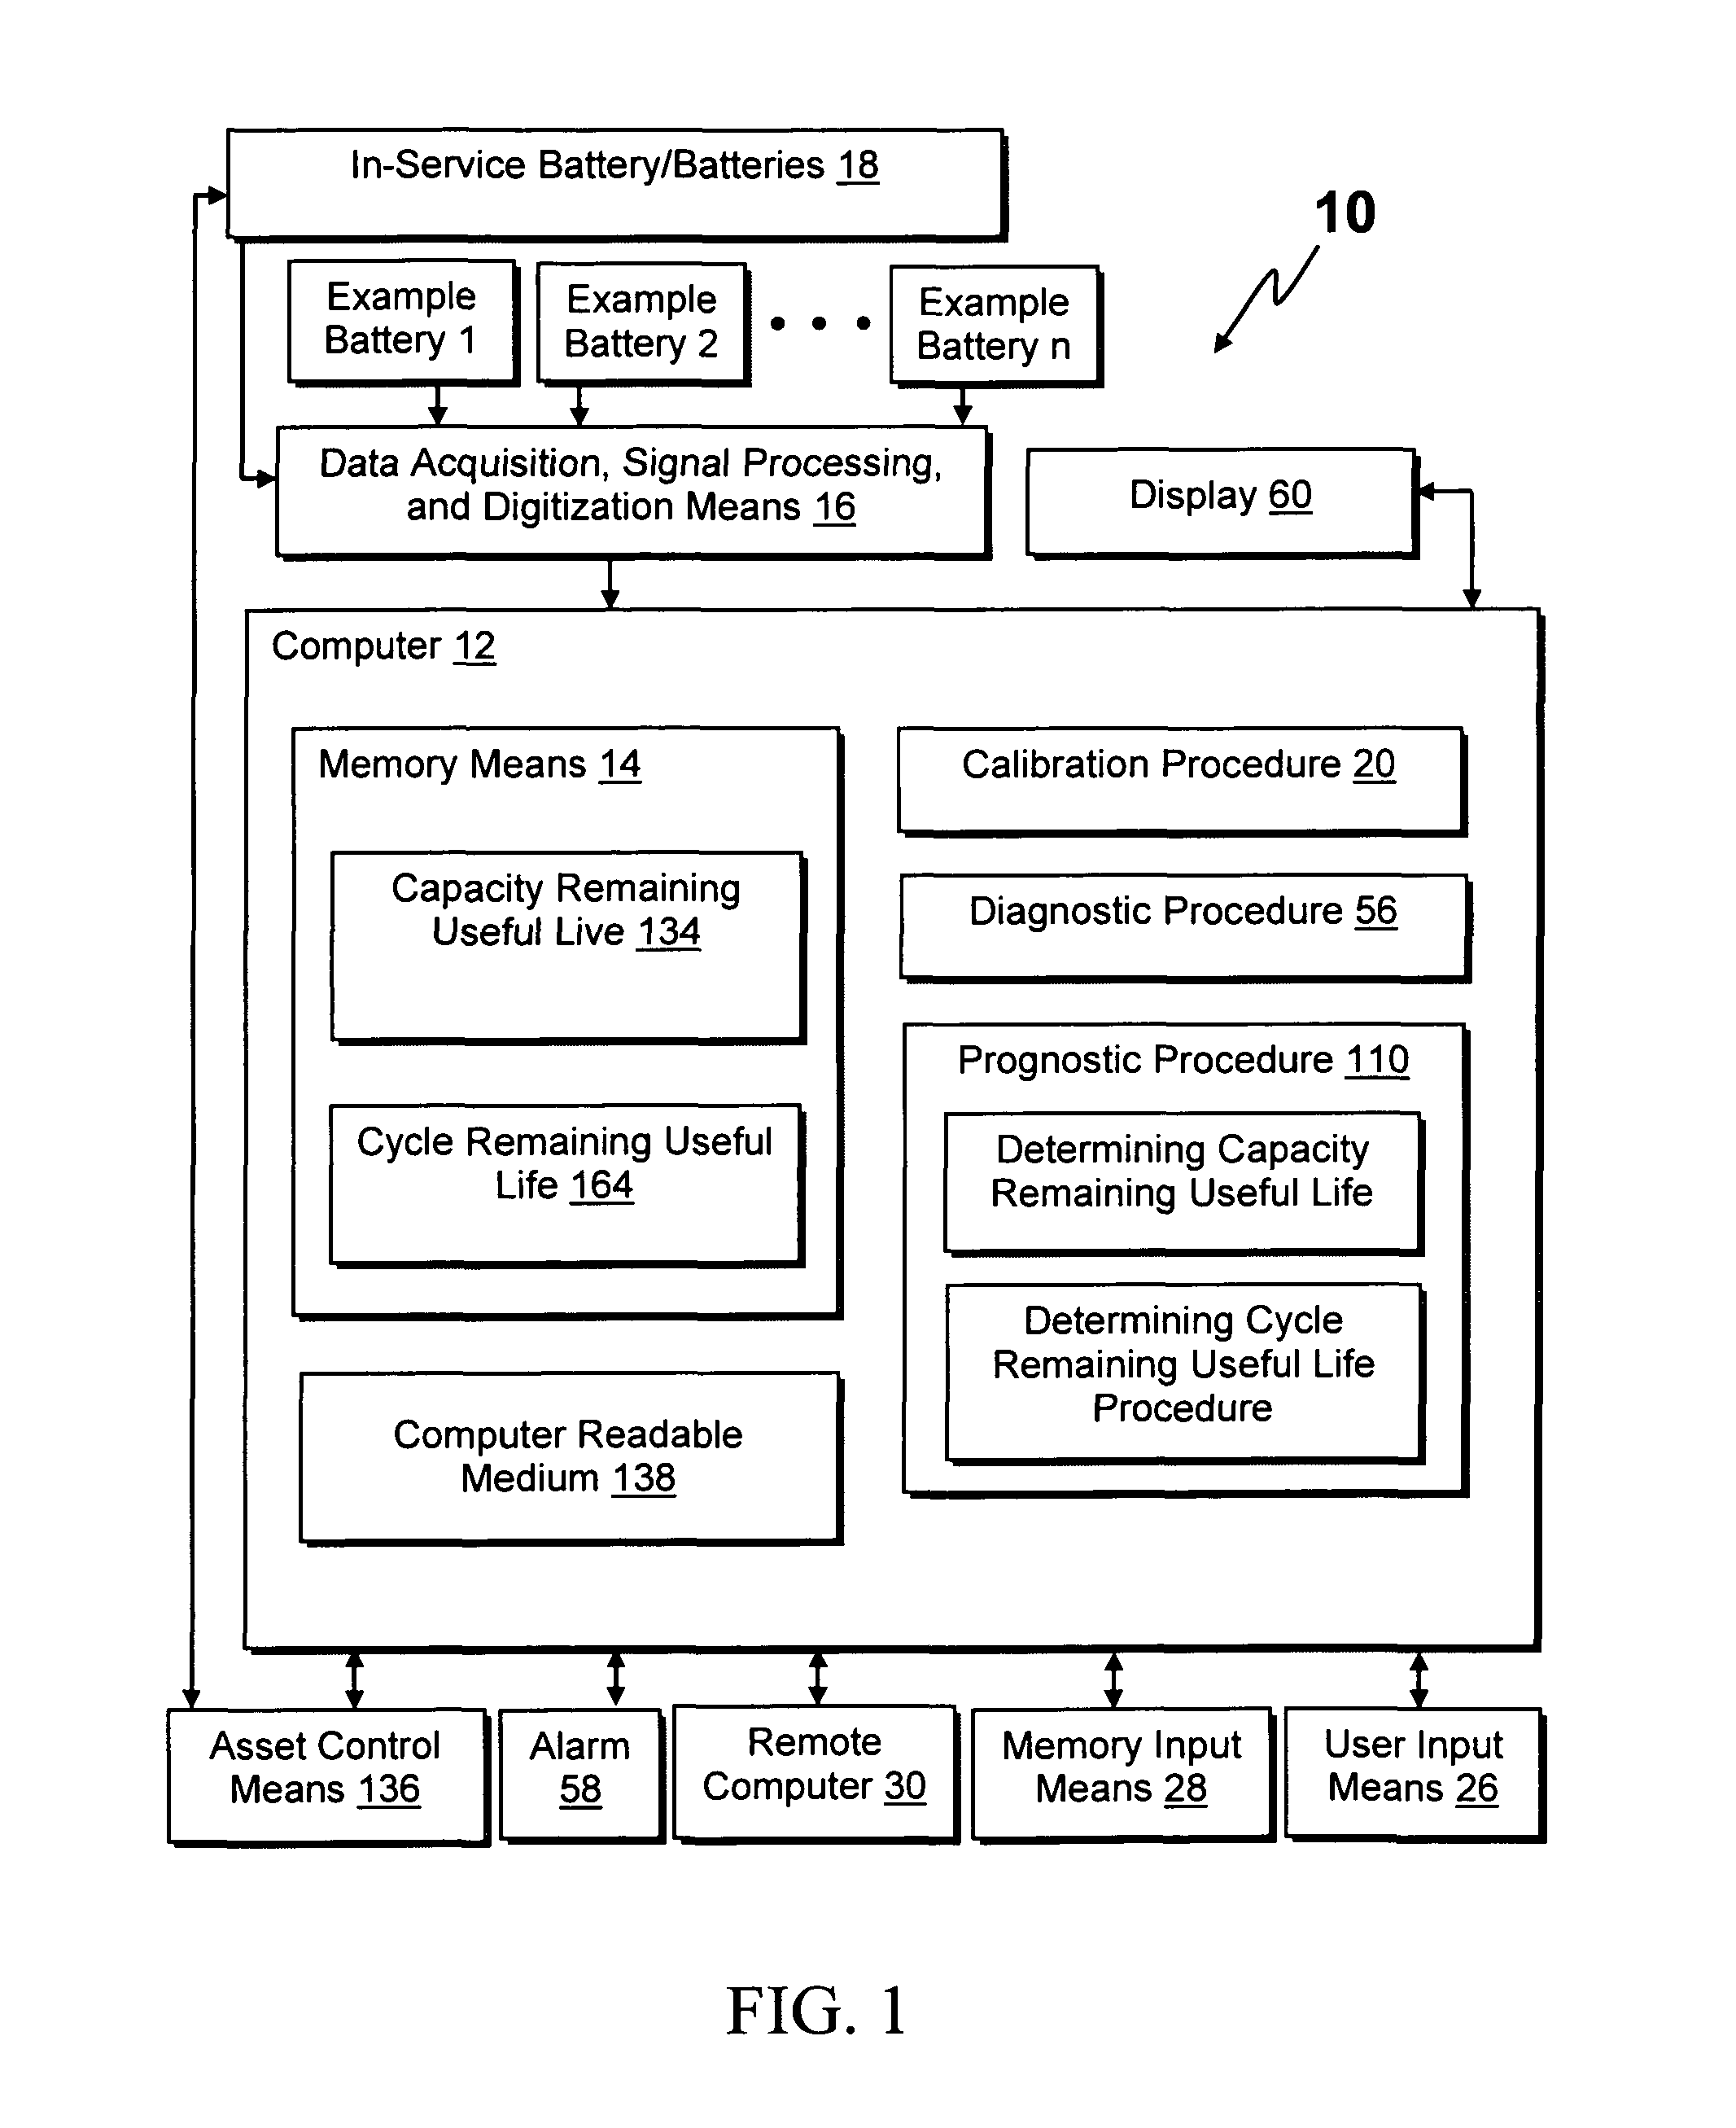 System and method for prognosticating capacity life and cycle life of a battery asset